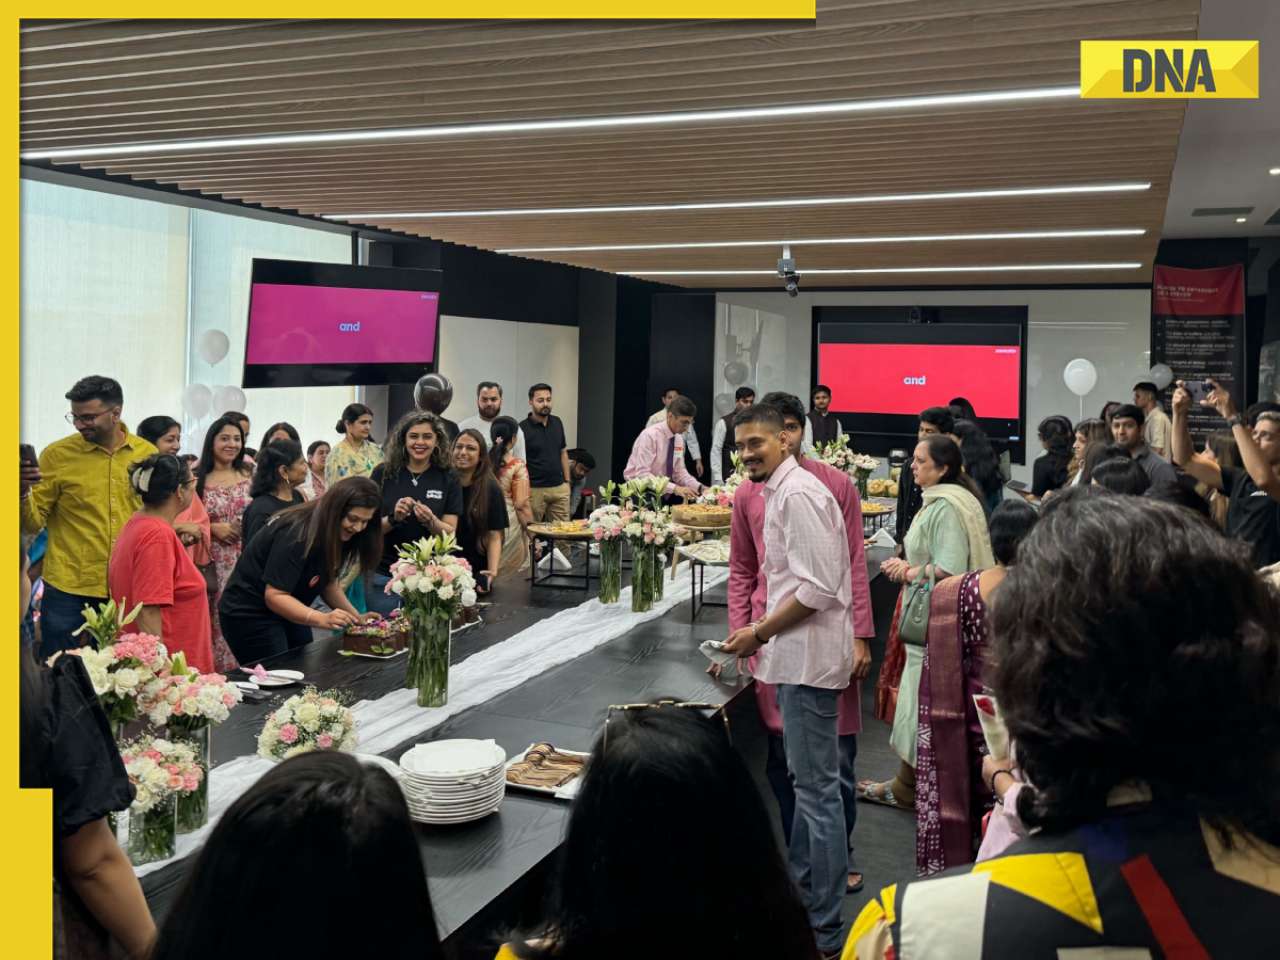 Zomato CEO Deepinder Goyal invites employees' moms to office for Mother's Day celebration, watch